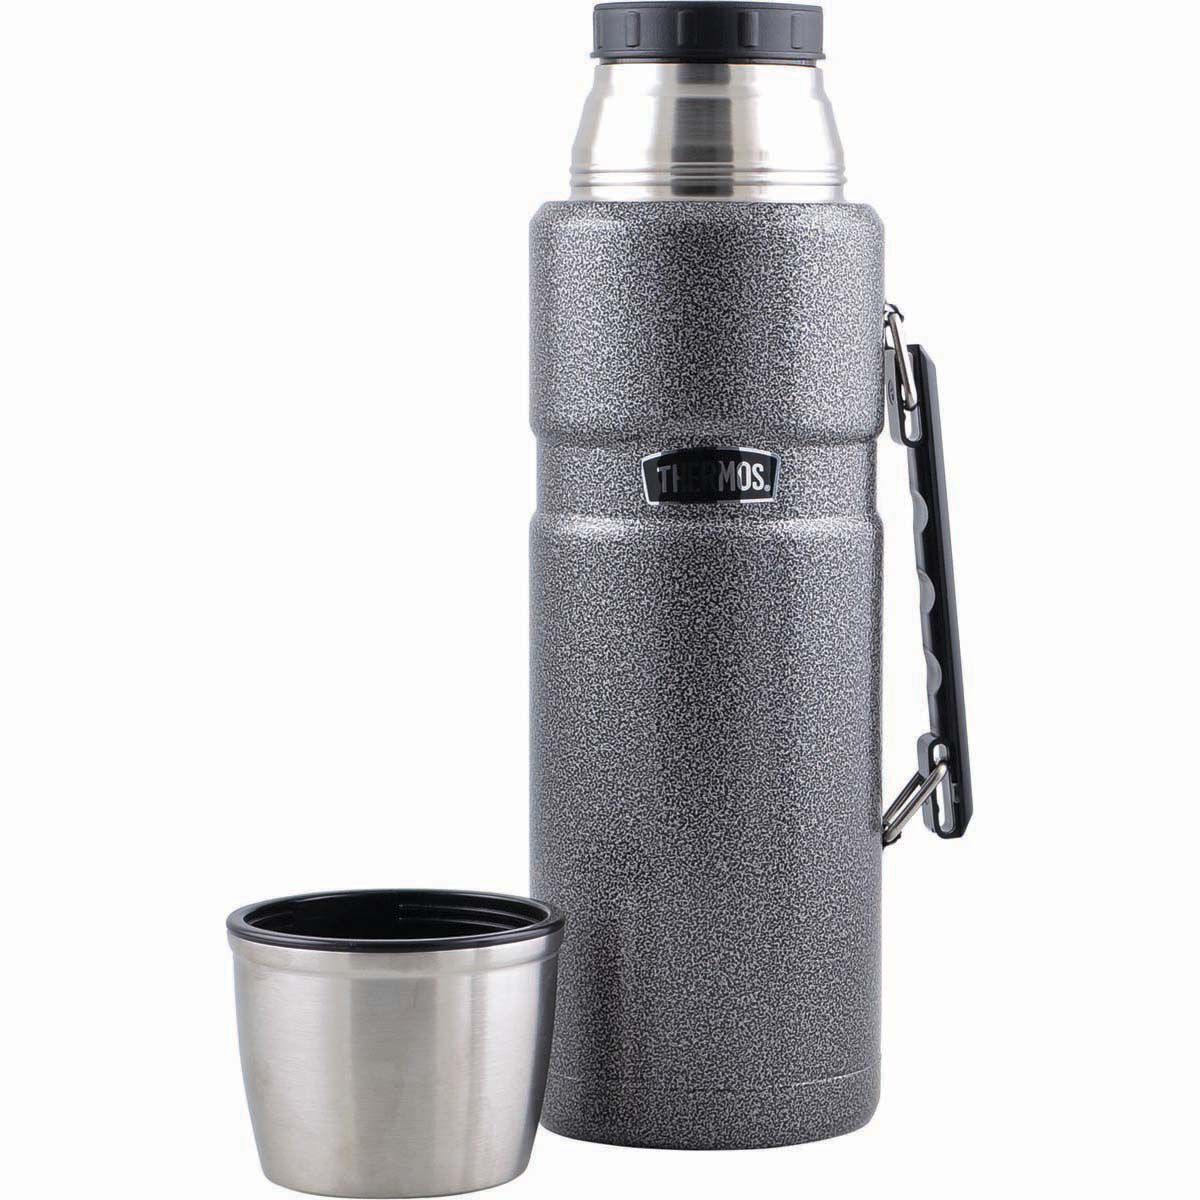 2ltr thermos flask